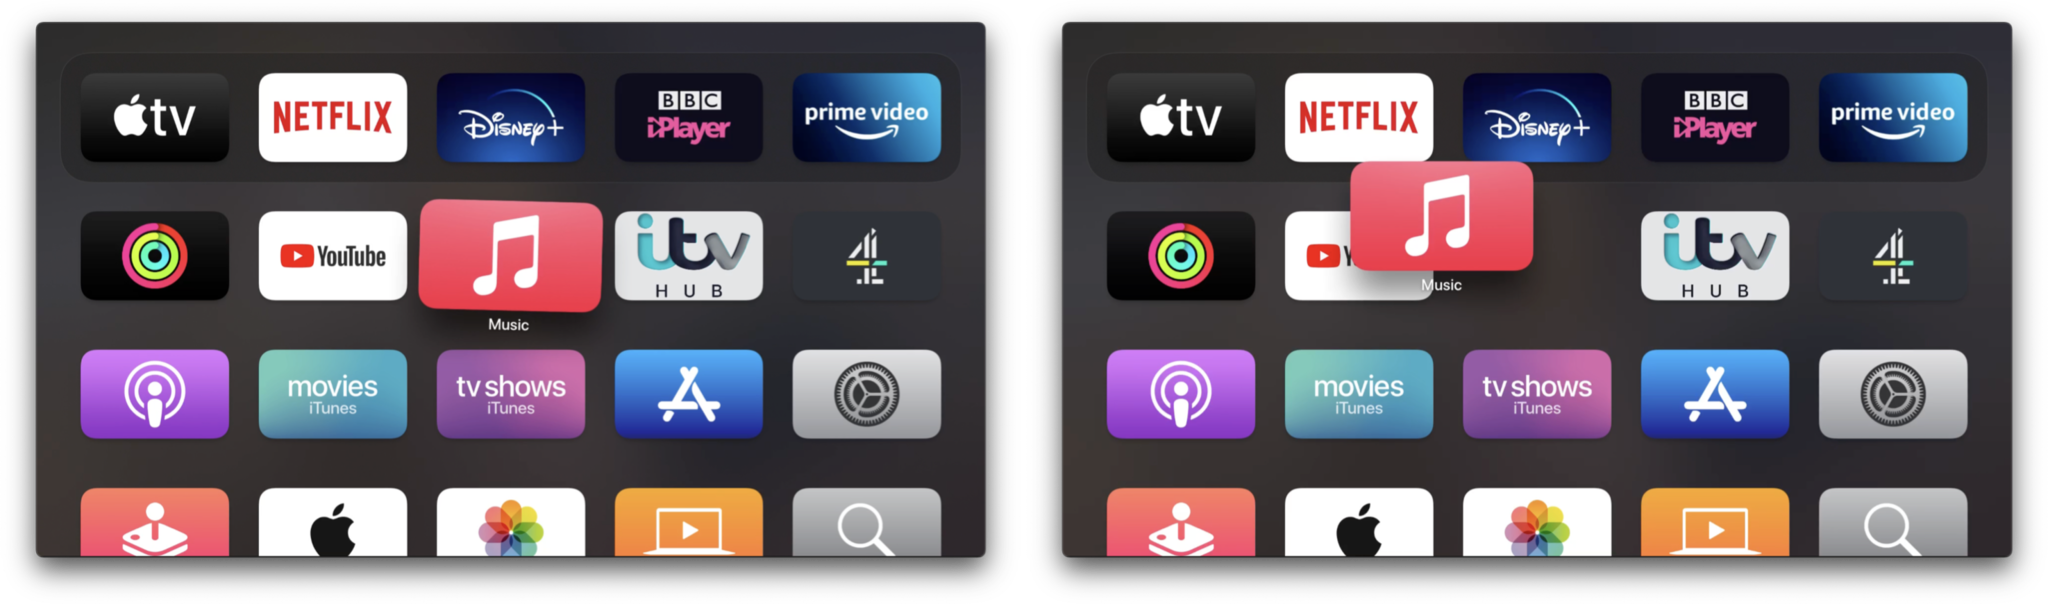 Rearrange apps on Apple TV: Click and hold on the app's icon, drag it to a new position.